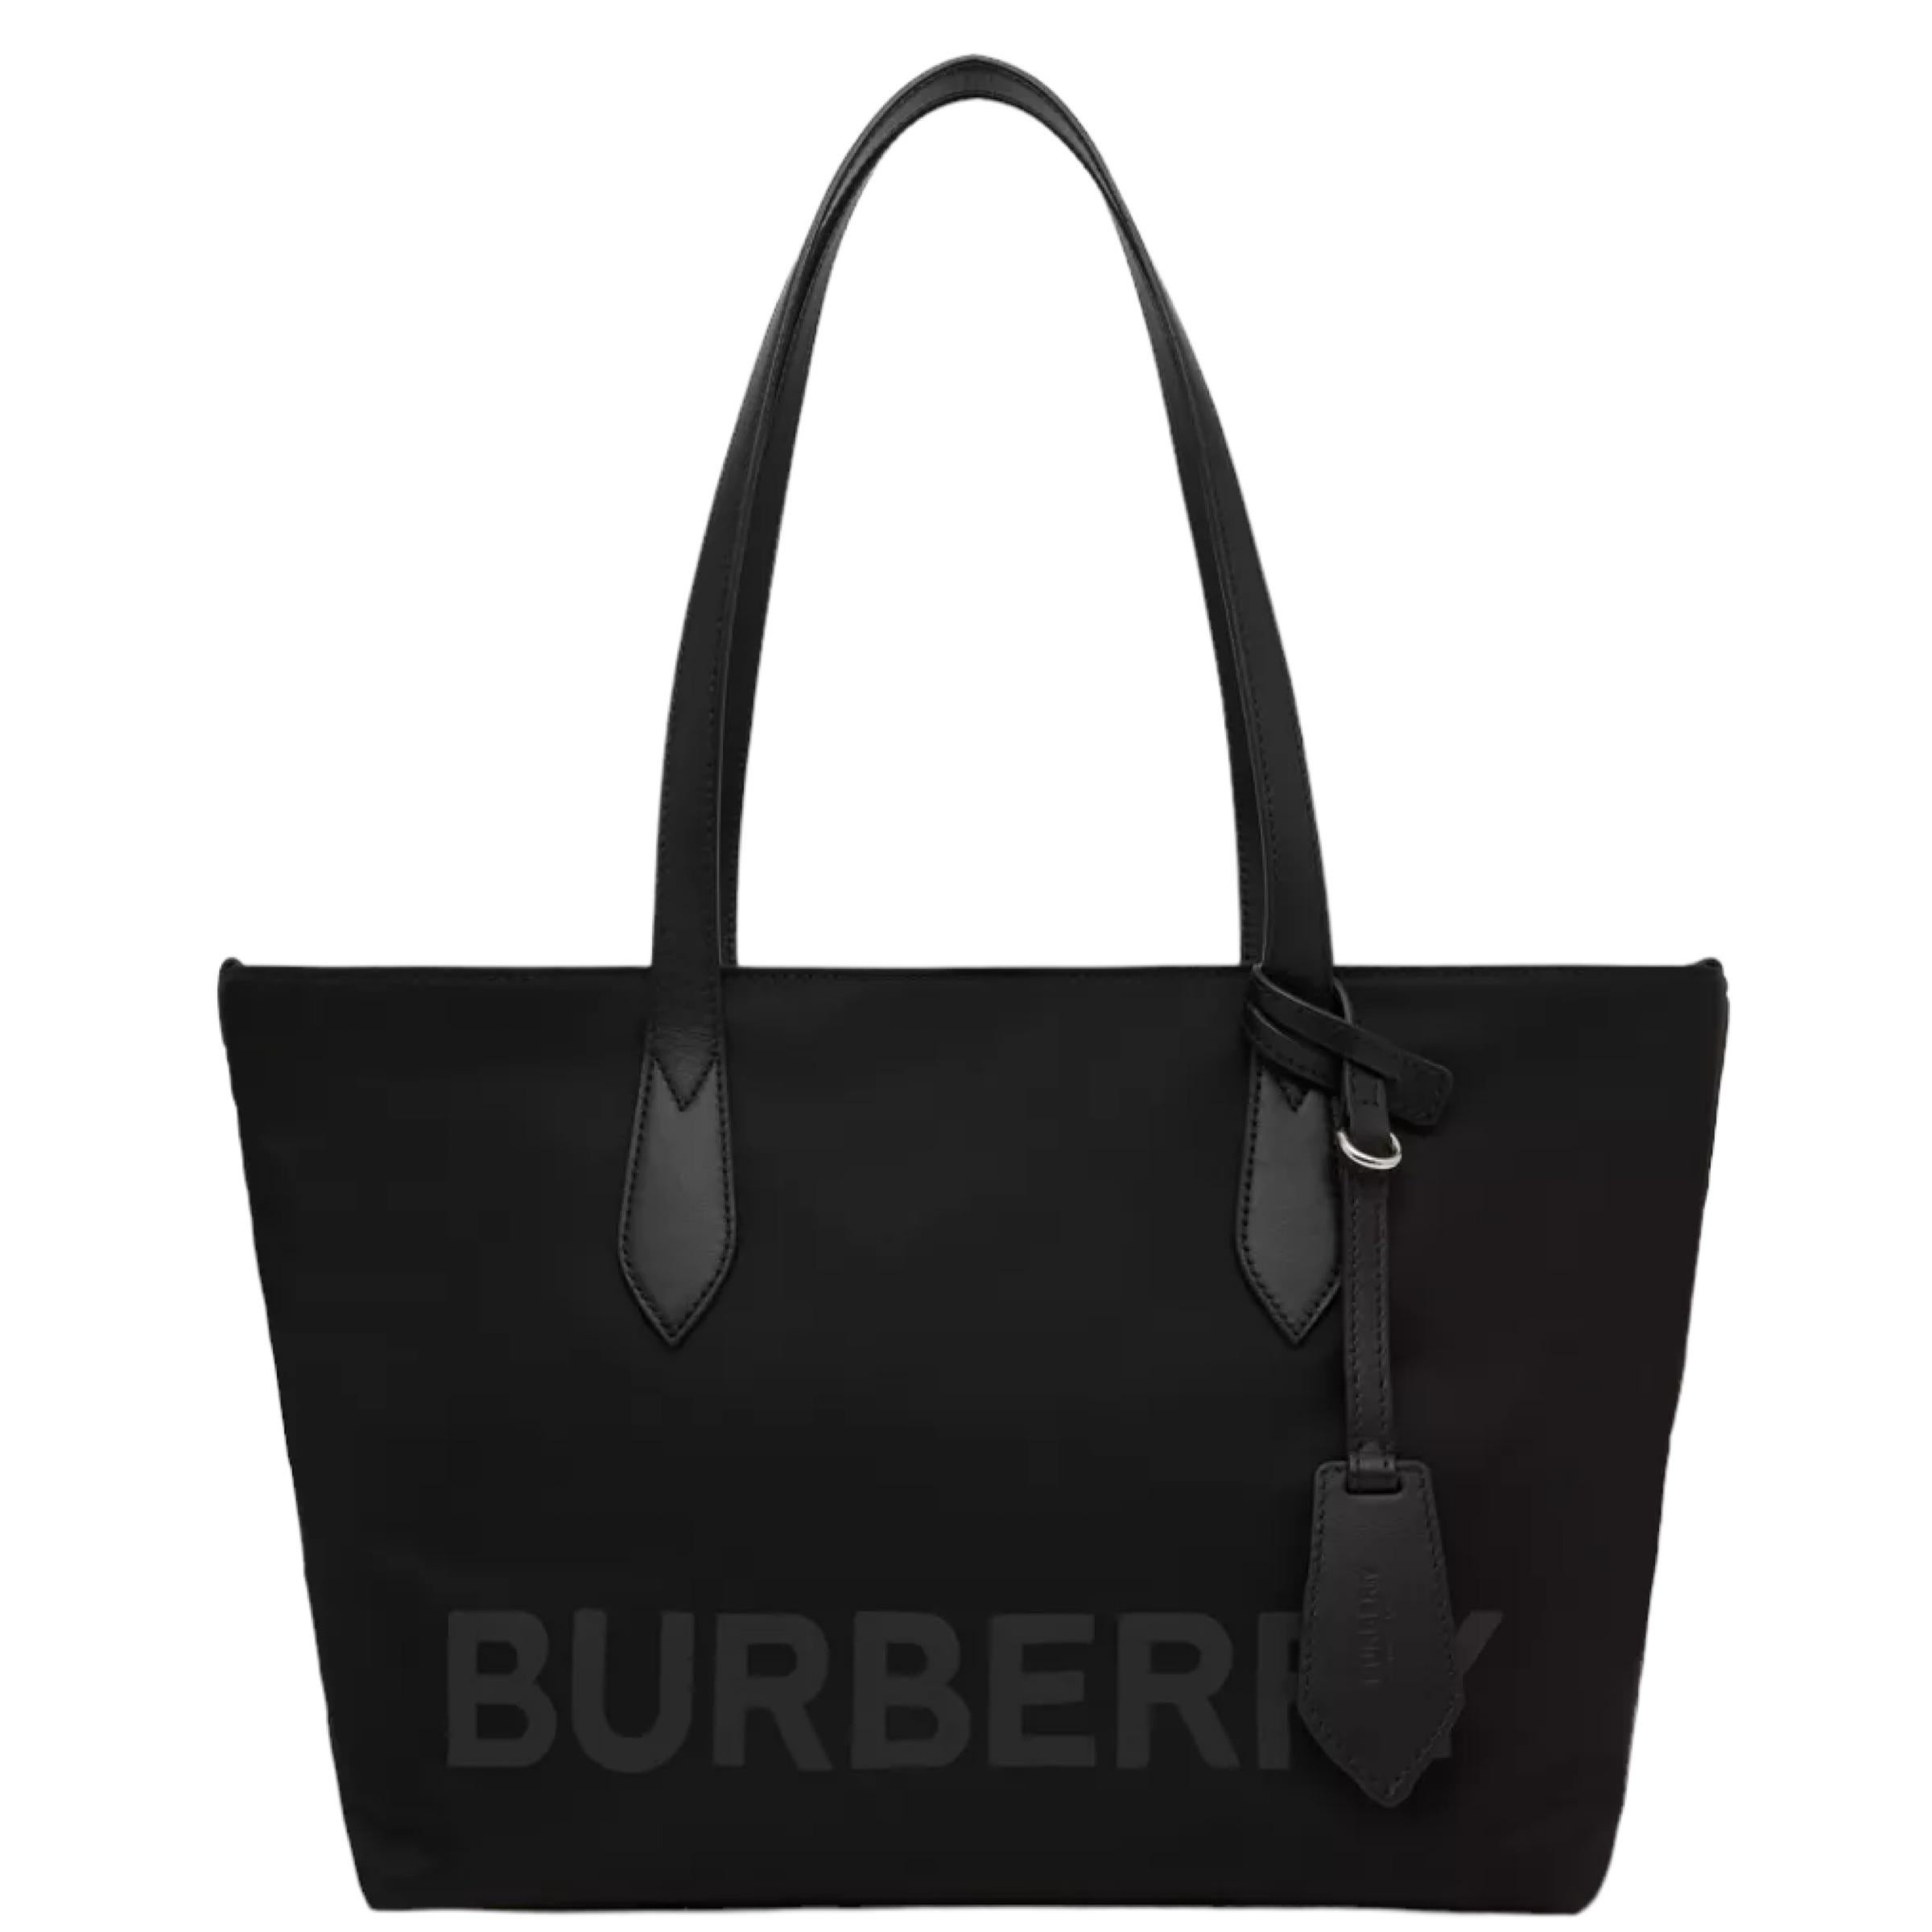 New Burberry Black Printed Logo Econyl Tote Shoulder Bag

Authenticity Guaranteed

DETAILS
Brand: Burberry
Condition: Brand new
Gender: Unisex
Category: Tote bag
Color: Black
Material: Econyl
Front logo print
Silver-tone hardware
Leather handles
1